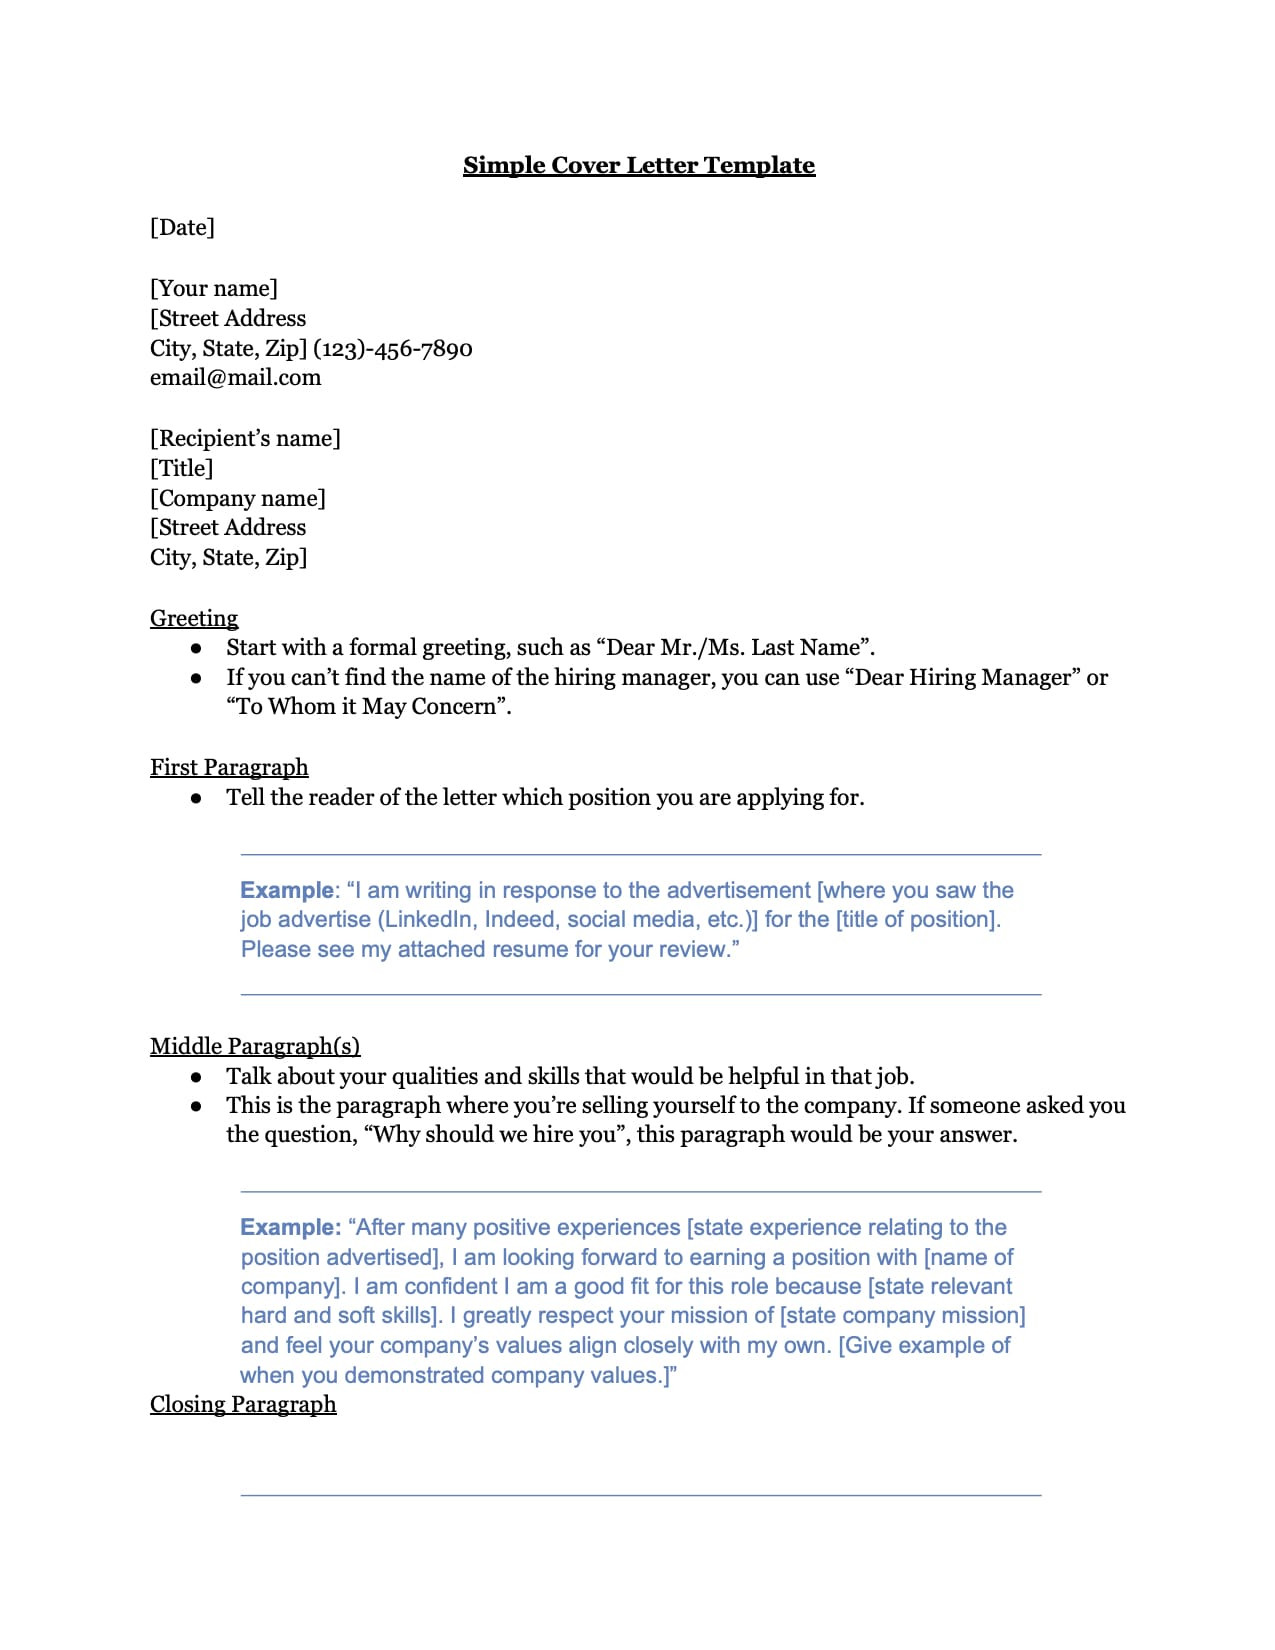 Cover Letter Samples that Dont Look Like A Resume Cover Letter Templates From Jobscan